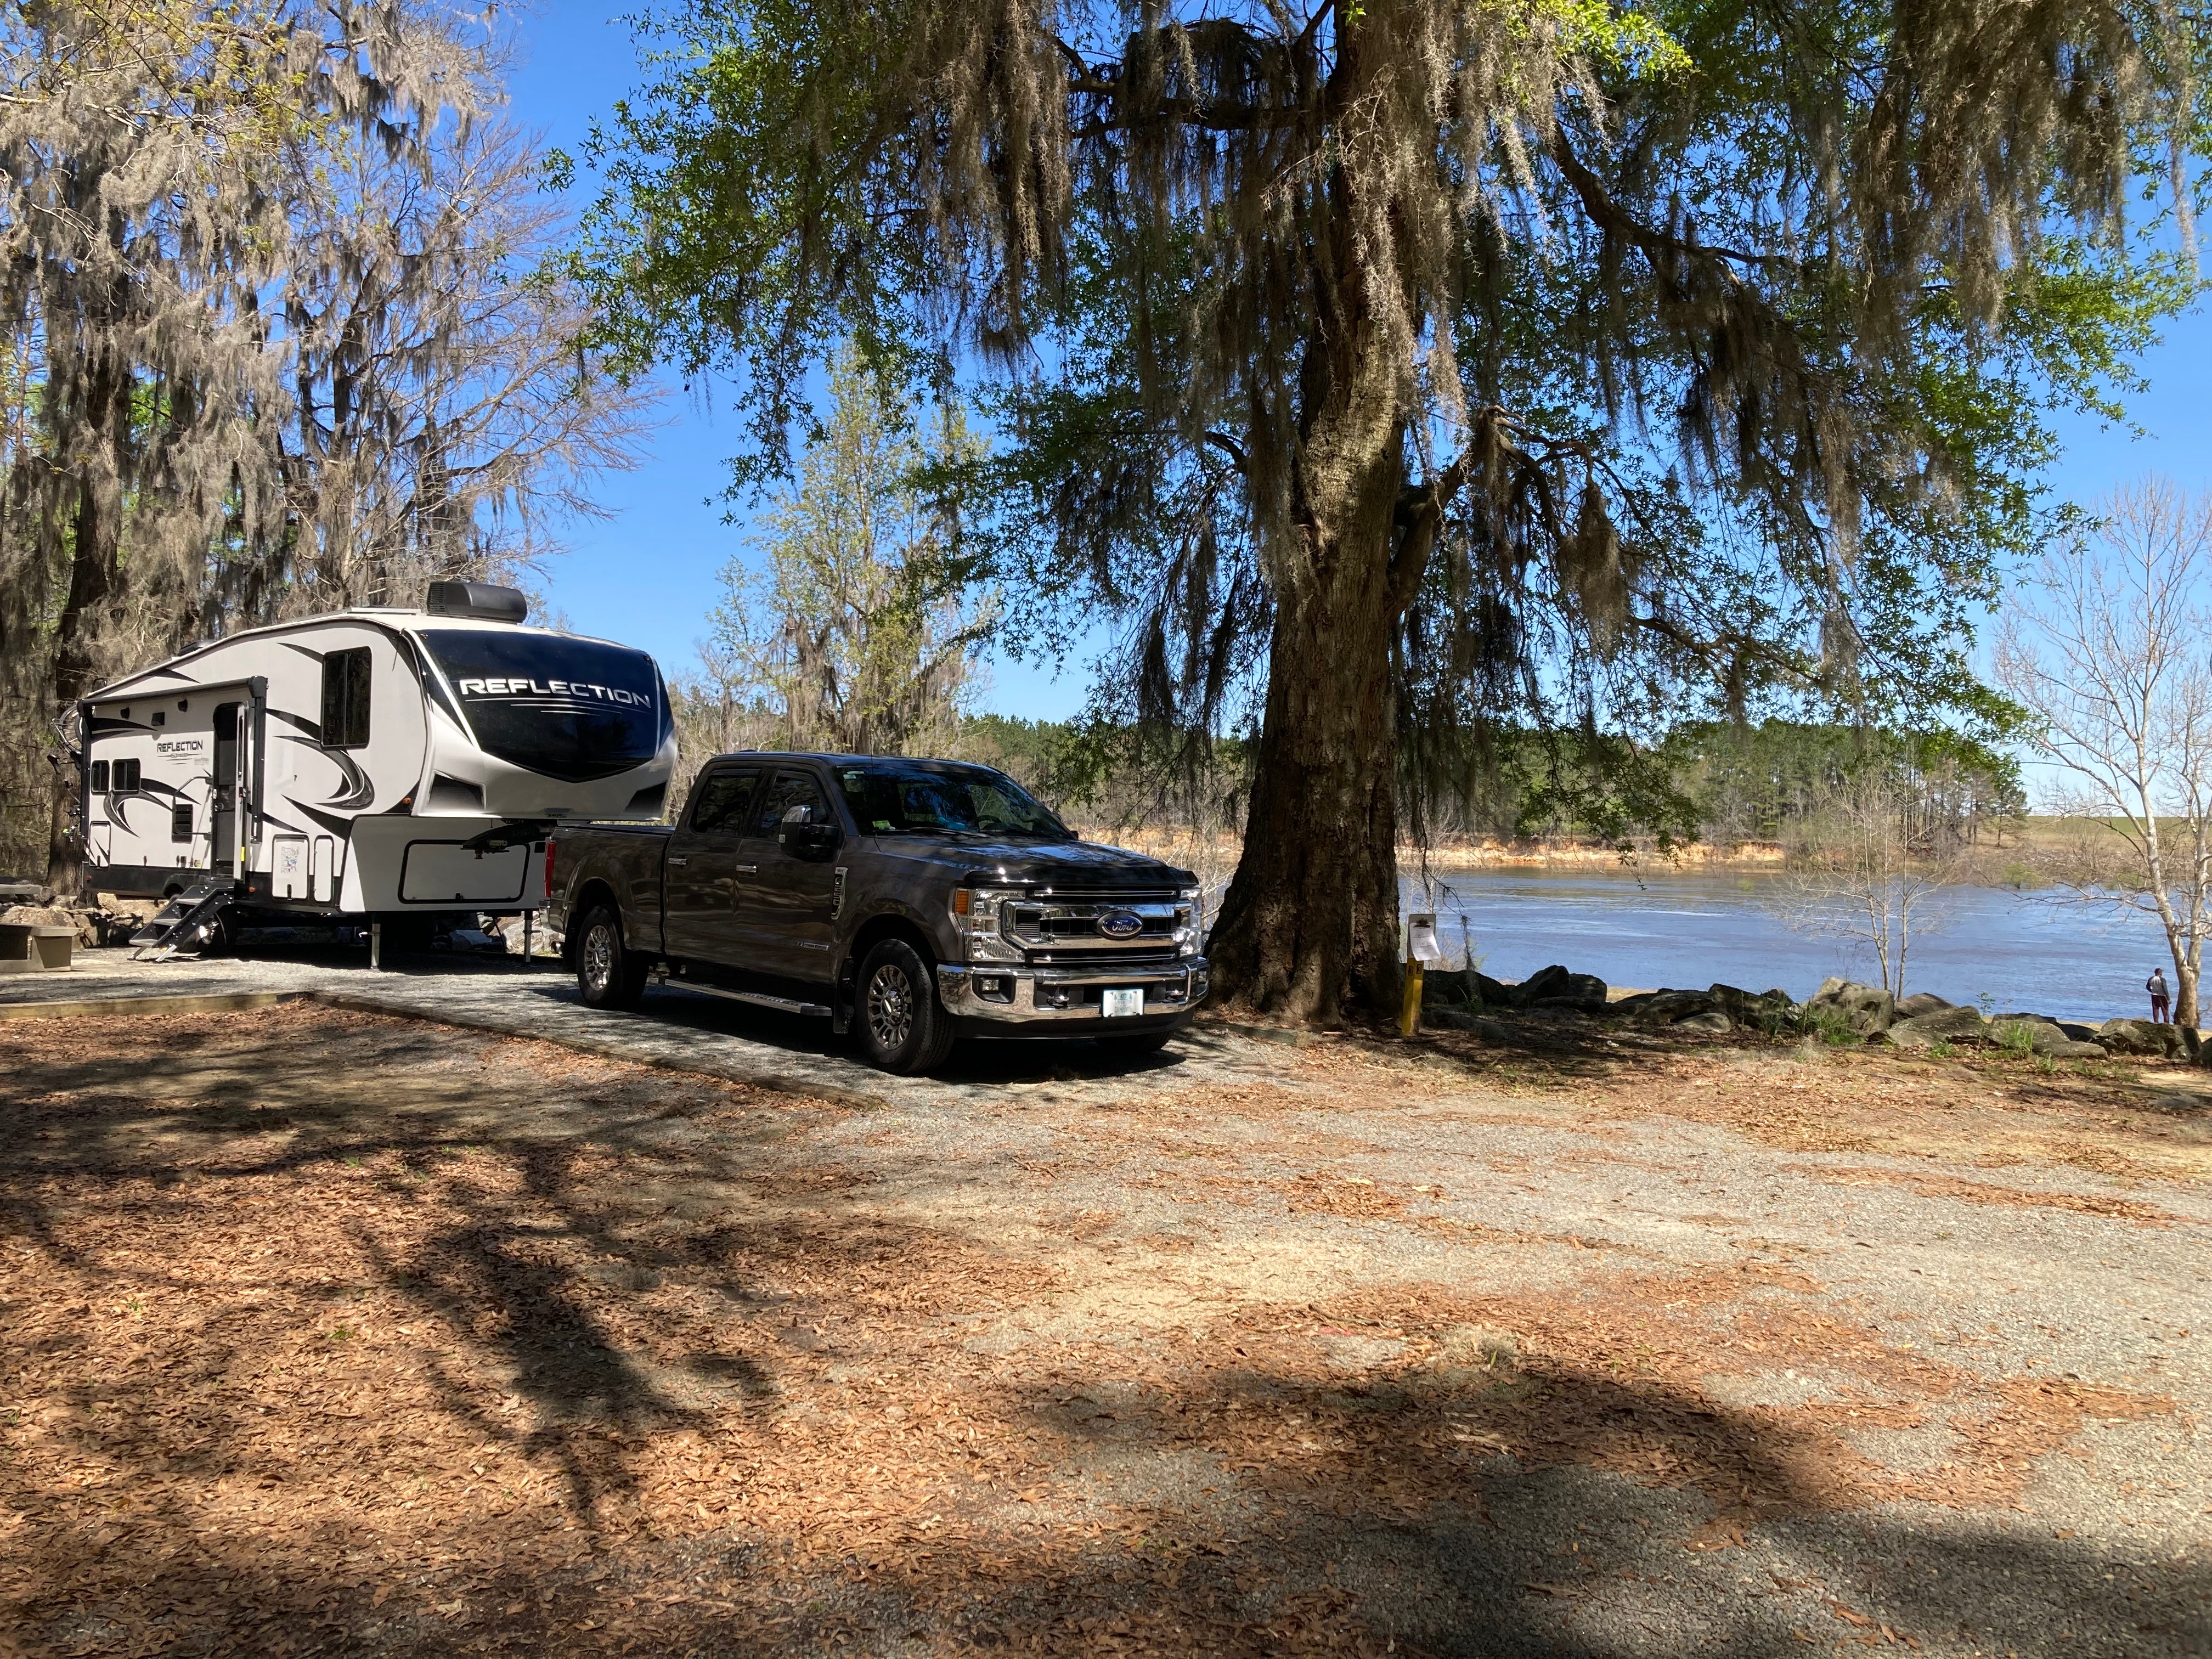 Camper submitted image from Killebrew Park - 1